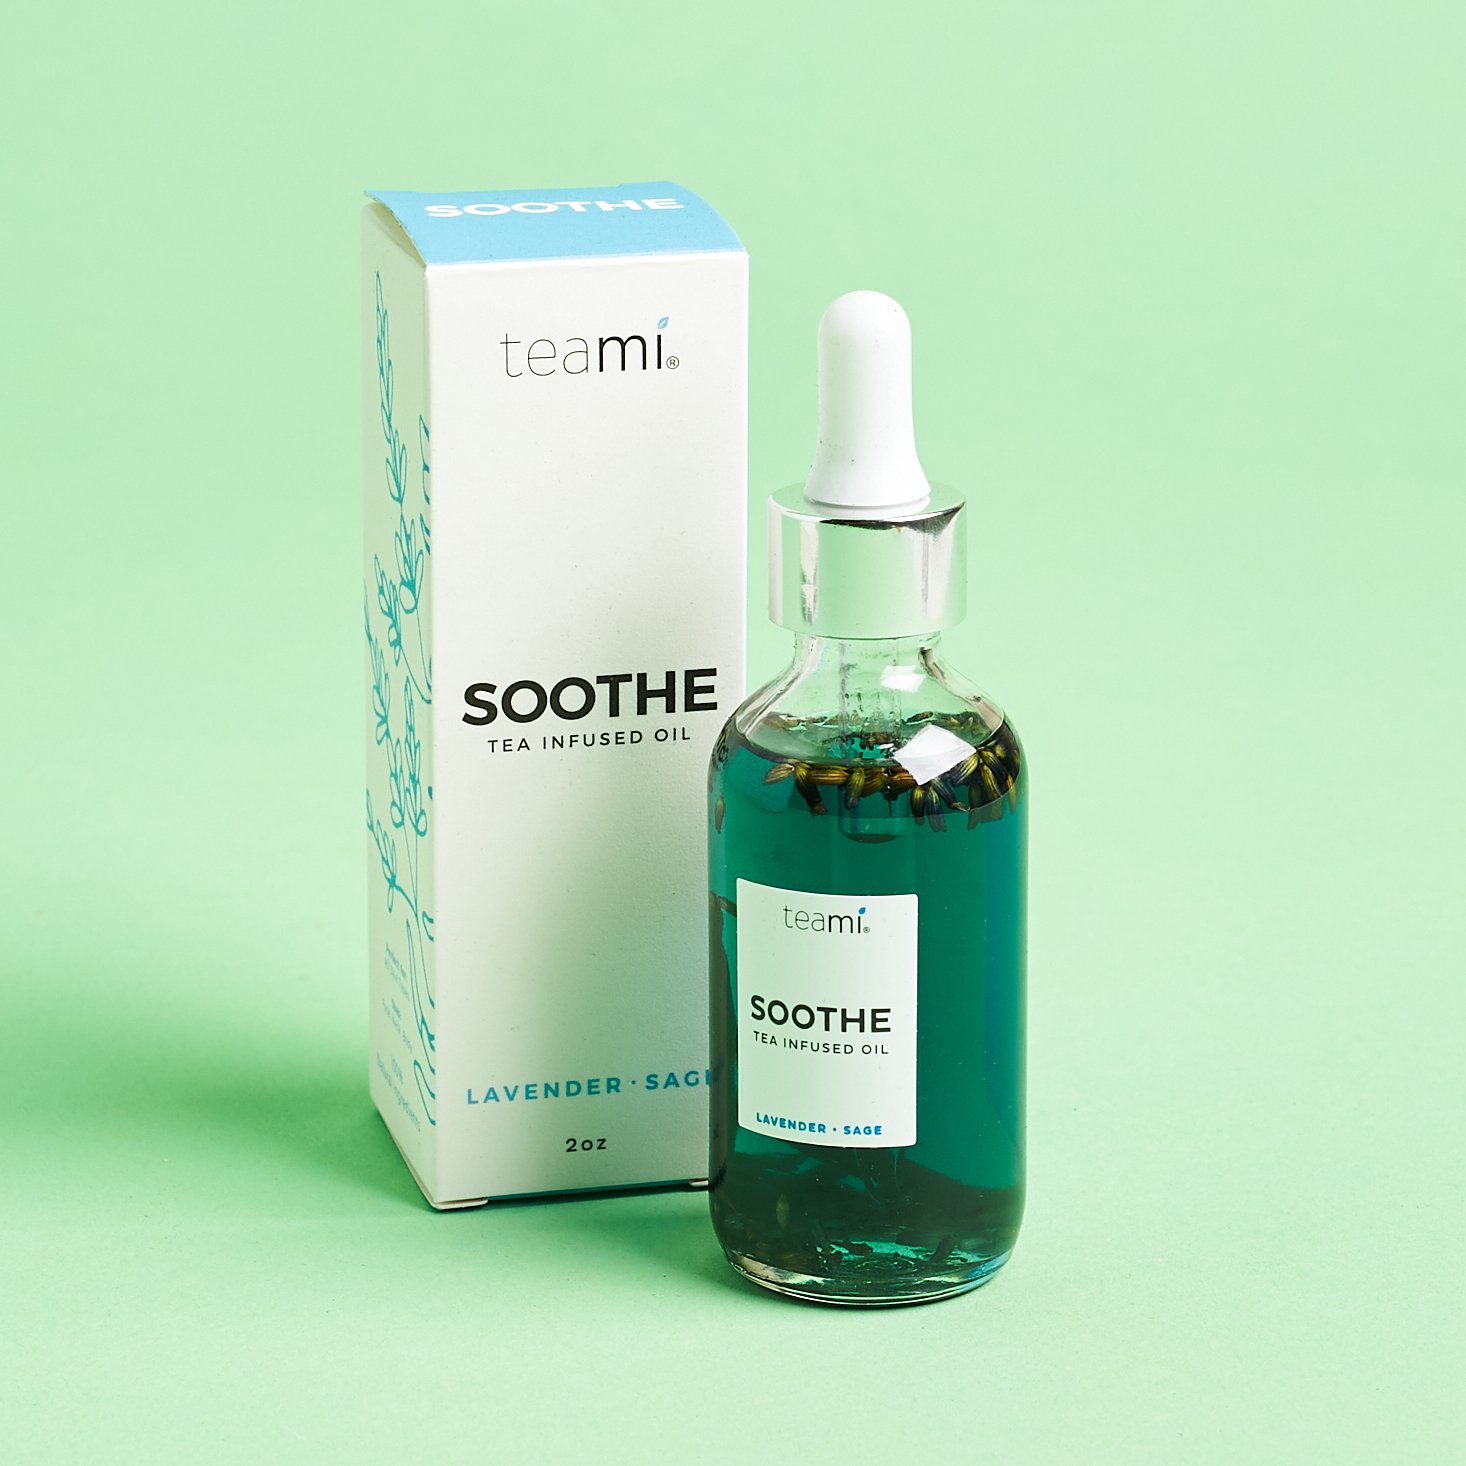 teami Soothe Facial Oil with box